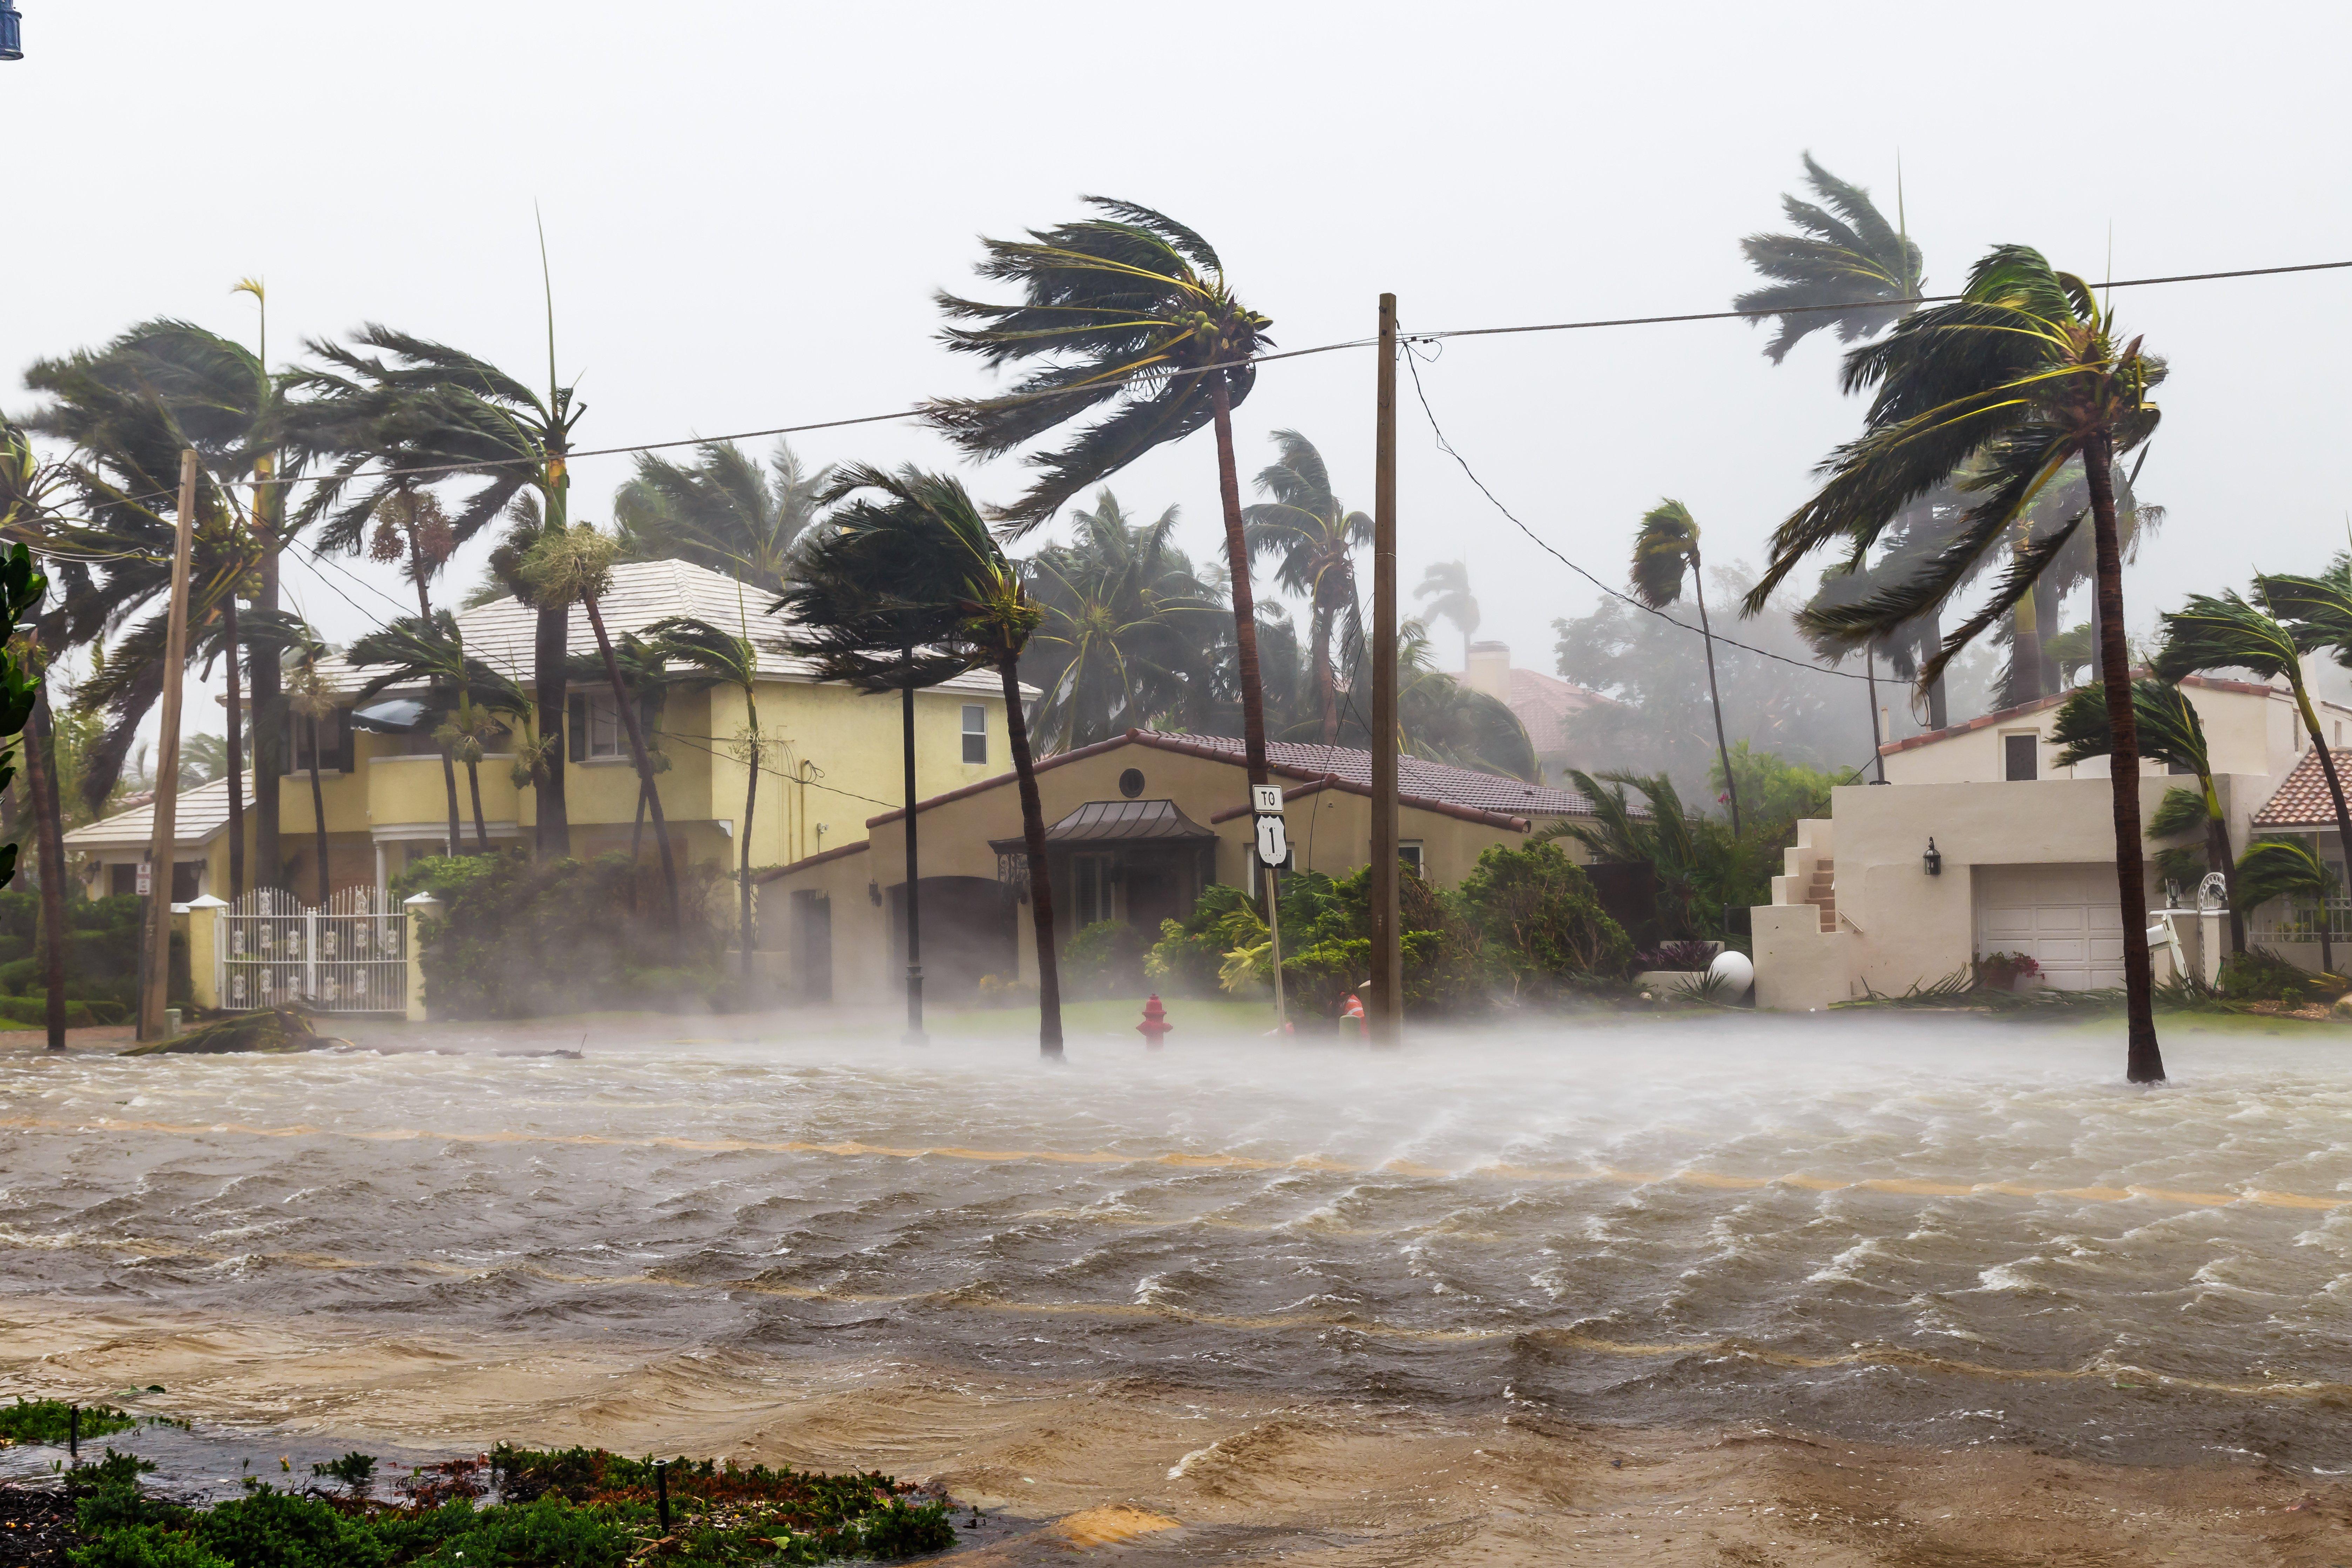 Hurricane-force winds blow palm trees in a residential neighborhood.